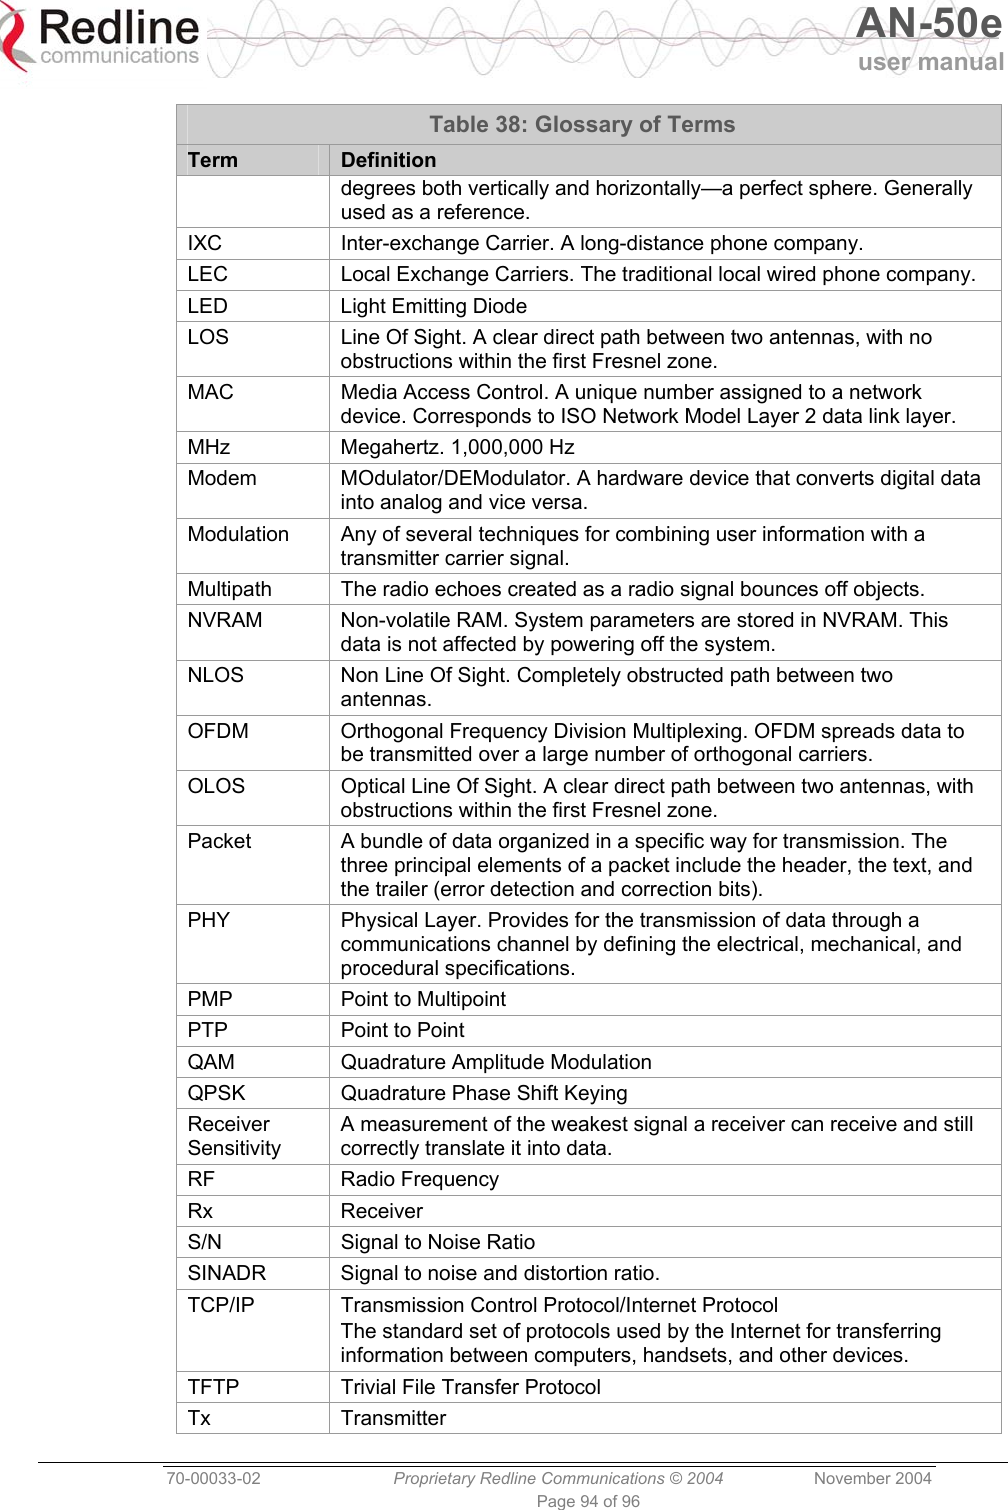   AN-50e user manual  70-00033-02  Proprietary Redline Communications © 2004 November 2004 Page 94 of 96 Table 38: Glossary of Terms Term  Definition degrees both vertically and horizontally—a perfect sphere. Generally used as a reference. IXC  Inter-exchange Carrier. A long-distance phone company. LEC   Local Exchange Carriers. The traditional local wired phone company.  LED  Light Emitting Diode LOS   Line Of Sight. A clear direct path between two antennas, with no obstructions within the first Fresnel zone. MAC   Media Access Control. A unique number assigned to a network device. Corresponds to ISO Network Model Layer 2 data link layer.  MHz  Megahertz. 1,000,000 Hz Modem   MOdulator/DEModulator. A hardware device that converts digital data into analog and vice versa.  Modulation   Any of several techniques for combining user information with a transmitter carrier signal. Multipath   The radio echoes created as a radio signal bounces off objects. NVRAM  Non-volatile RAM. System parameters are stored in NVRAM. This data is not affected by powering off the system. NLOS  Non Line Of Sight. Completely obstructed path between two antennas. OFDM  Orthogonal Frequency Division Multiplexing. OFDM spreads data to be transmitted over a large number of orthogonal carriers.  OLOS  Optical Line Of Sight. A clear direct path between two antennas, with obstructions within the first Fresnel zone. Packet  A bundle of data organized in a specific way for transmission. The three principal elements of a packet include the header, the text, and the trailer (error detection and correction bits).  PHY   Physical Layer. Provides for the transmission of data through a communications channel by defining the electrical, mechanical, and procedural specifications.  PMP  Point to Multipoint PTP  Point to Point QAM  Quadrature Amplitude Modulation QPSK  Quadrature Phase Shift Keying Receiver Sensitivity  A measurement of the weakest signal a receiver can receive and still correctly translate it into data. RF Radio Frequency Rx Receiver S/N  Signal to Noise Ratio SINADR  Signal to noise and distortion ratio. TCP/IP   Transmission Control Protocol/Internet Protocol The standard set of protocols used by the Internet for transferring information between computers, handsets, and other devices.  TFTP  Trivial File Transfer Protocol Tx Transmitter  